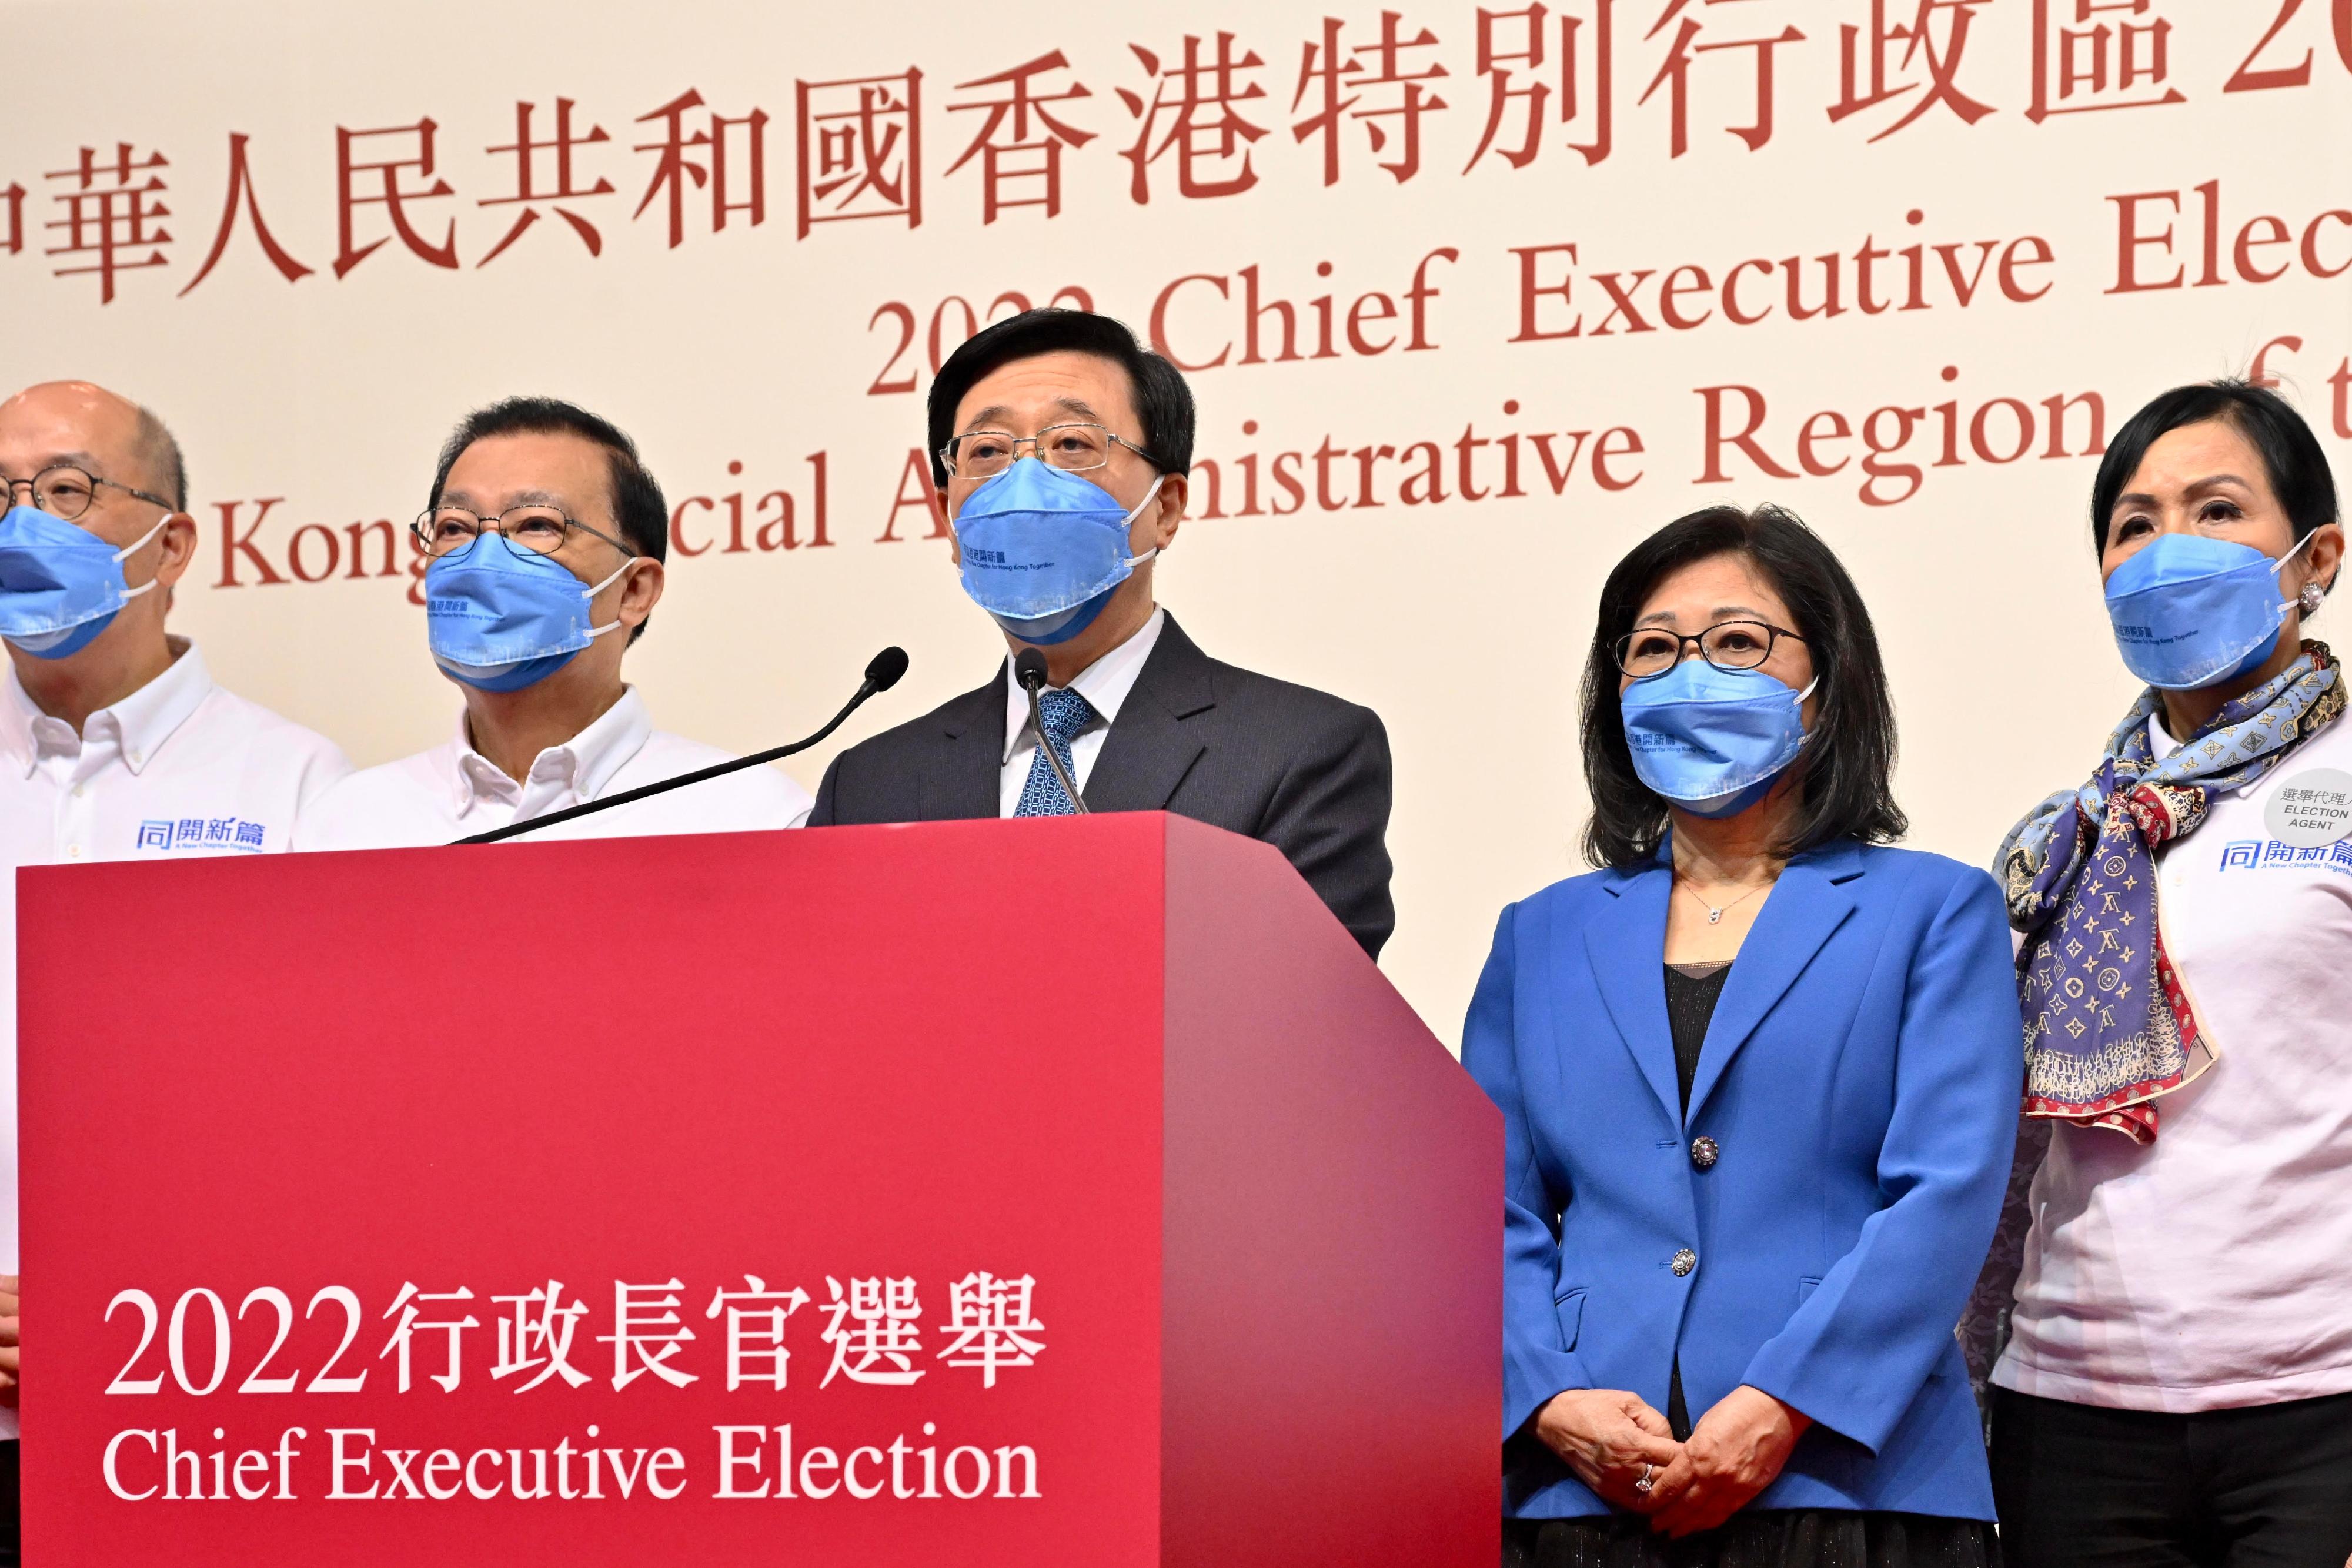 The 2022 Chief Executive Election was held at the Hong Kong Convention and Exhibition Centre in Wan Chai today (May 8). Picture shows Mr John Lee (centre) after his election as the sixth-term Chief Executive of the Hong Kong Special Administrative Region.